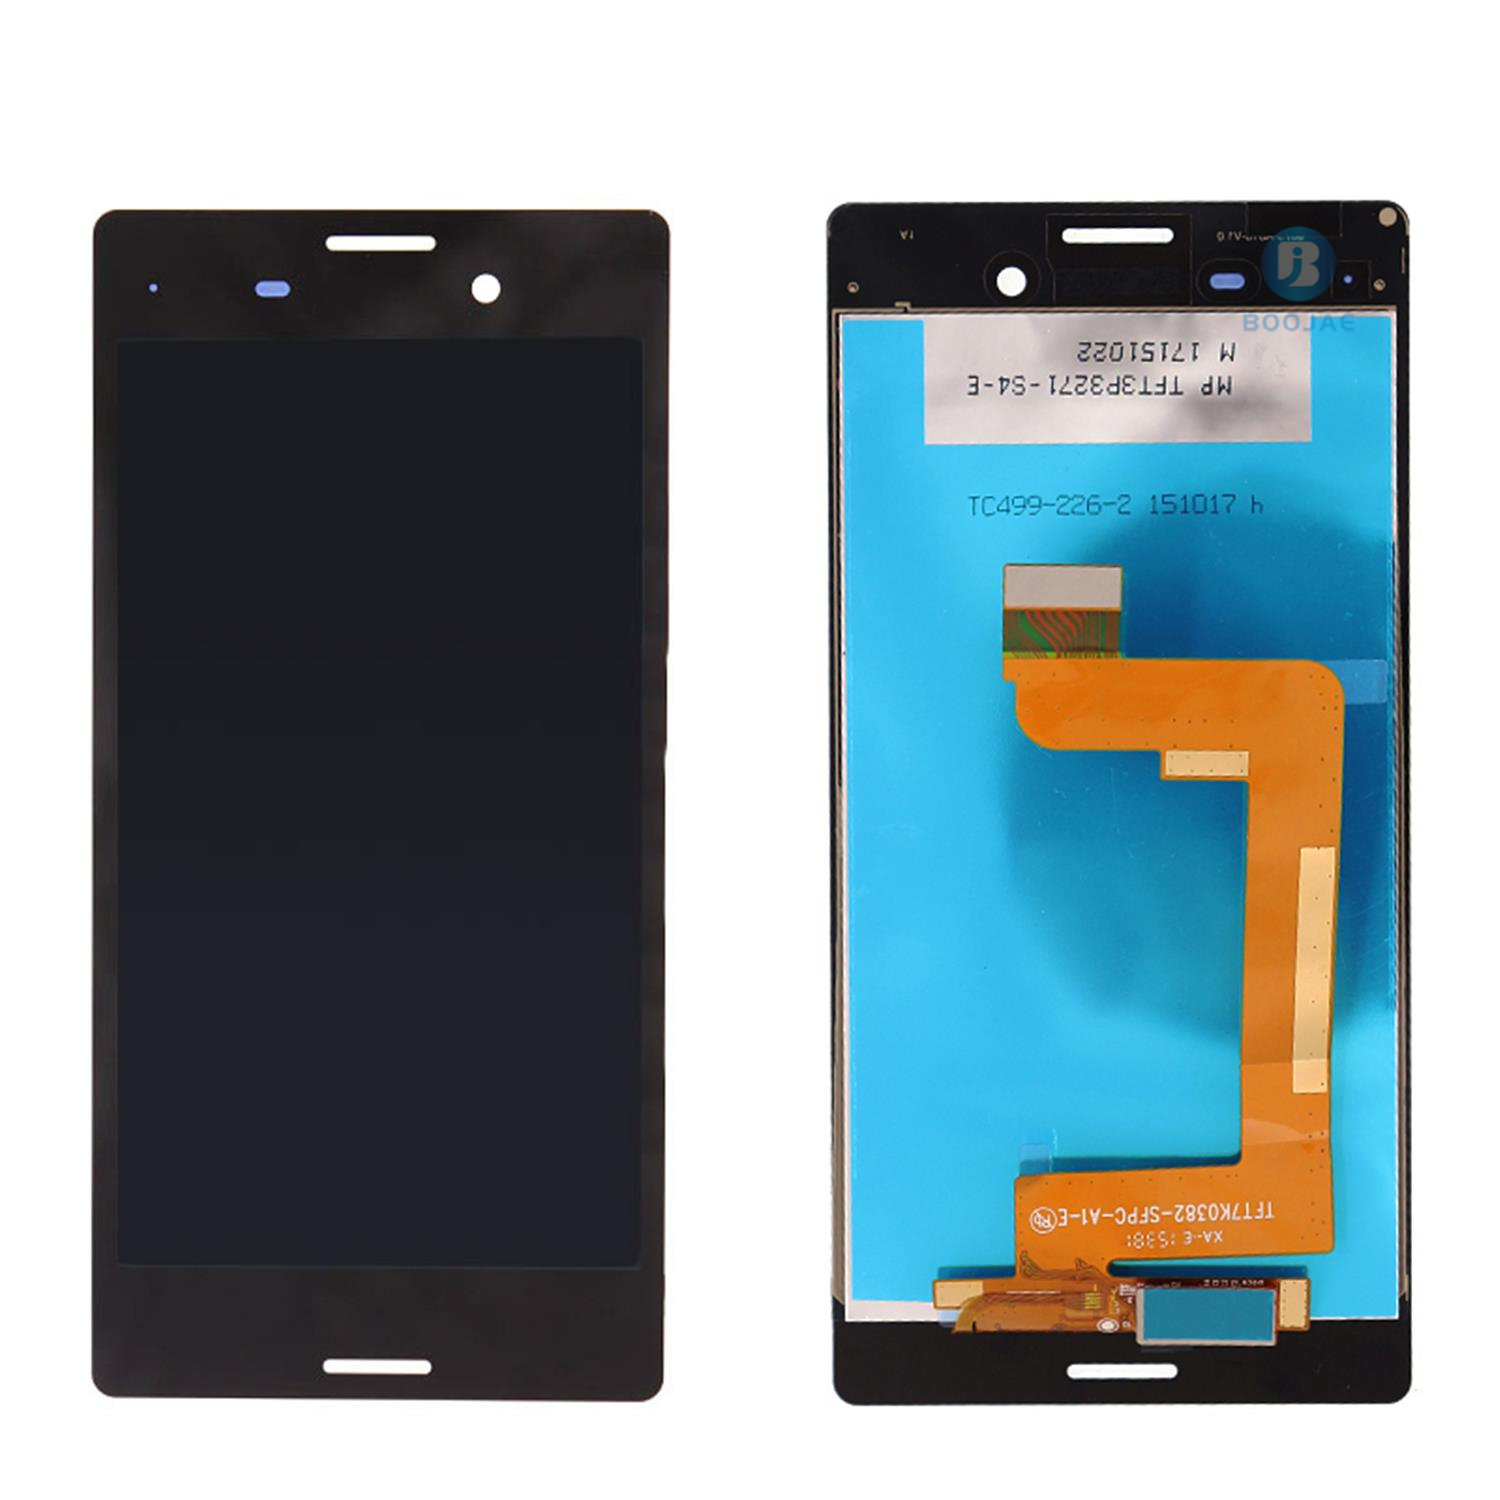 Sony Xperia M4 Aqua Lcd Screen Display, Lcd Assembly Replacement